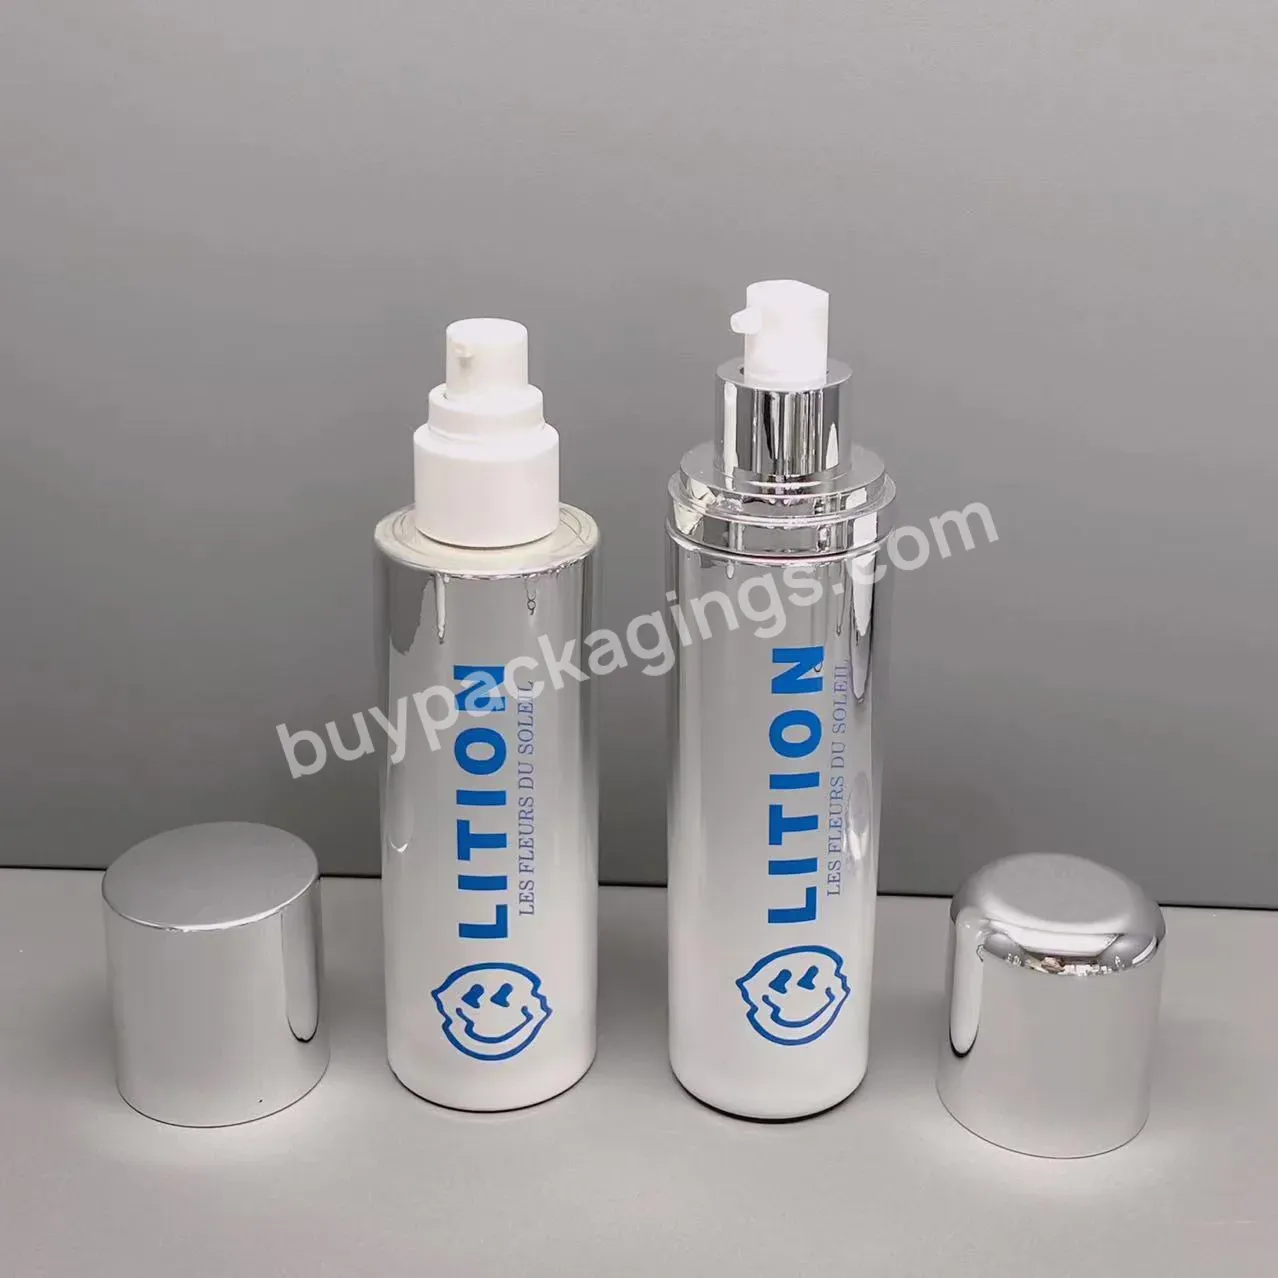 Gradient Silver Uv Coating Glass Lotion Bottle Cosmetic Packing Set With Cream Jar 40/100/120ml - Buy Uv Coating Glass Lotion Bottle,120ml Lotion Bottle,Cream Jar.